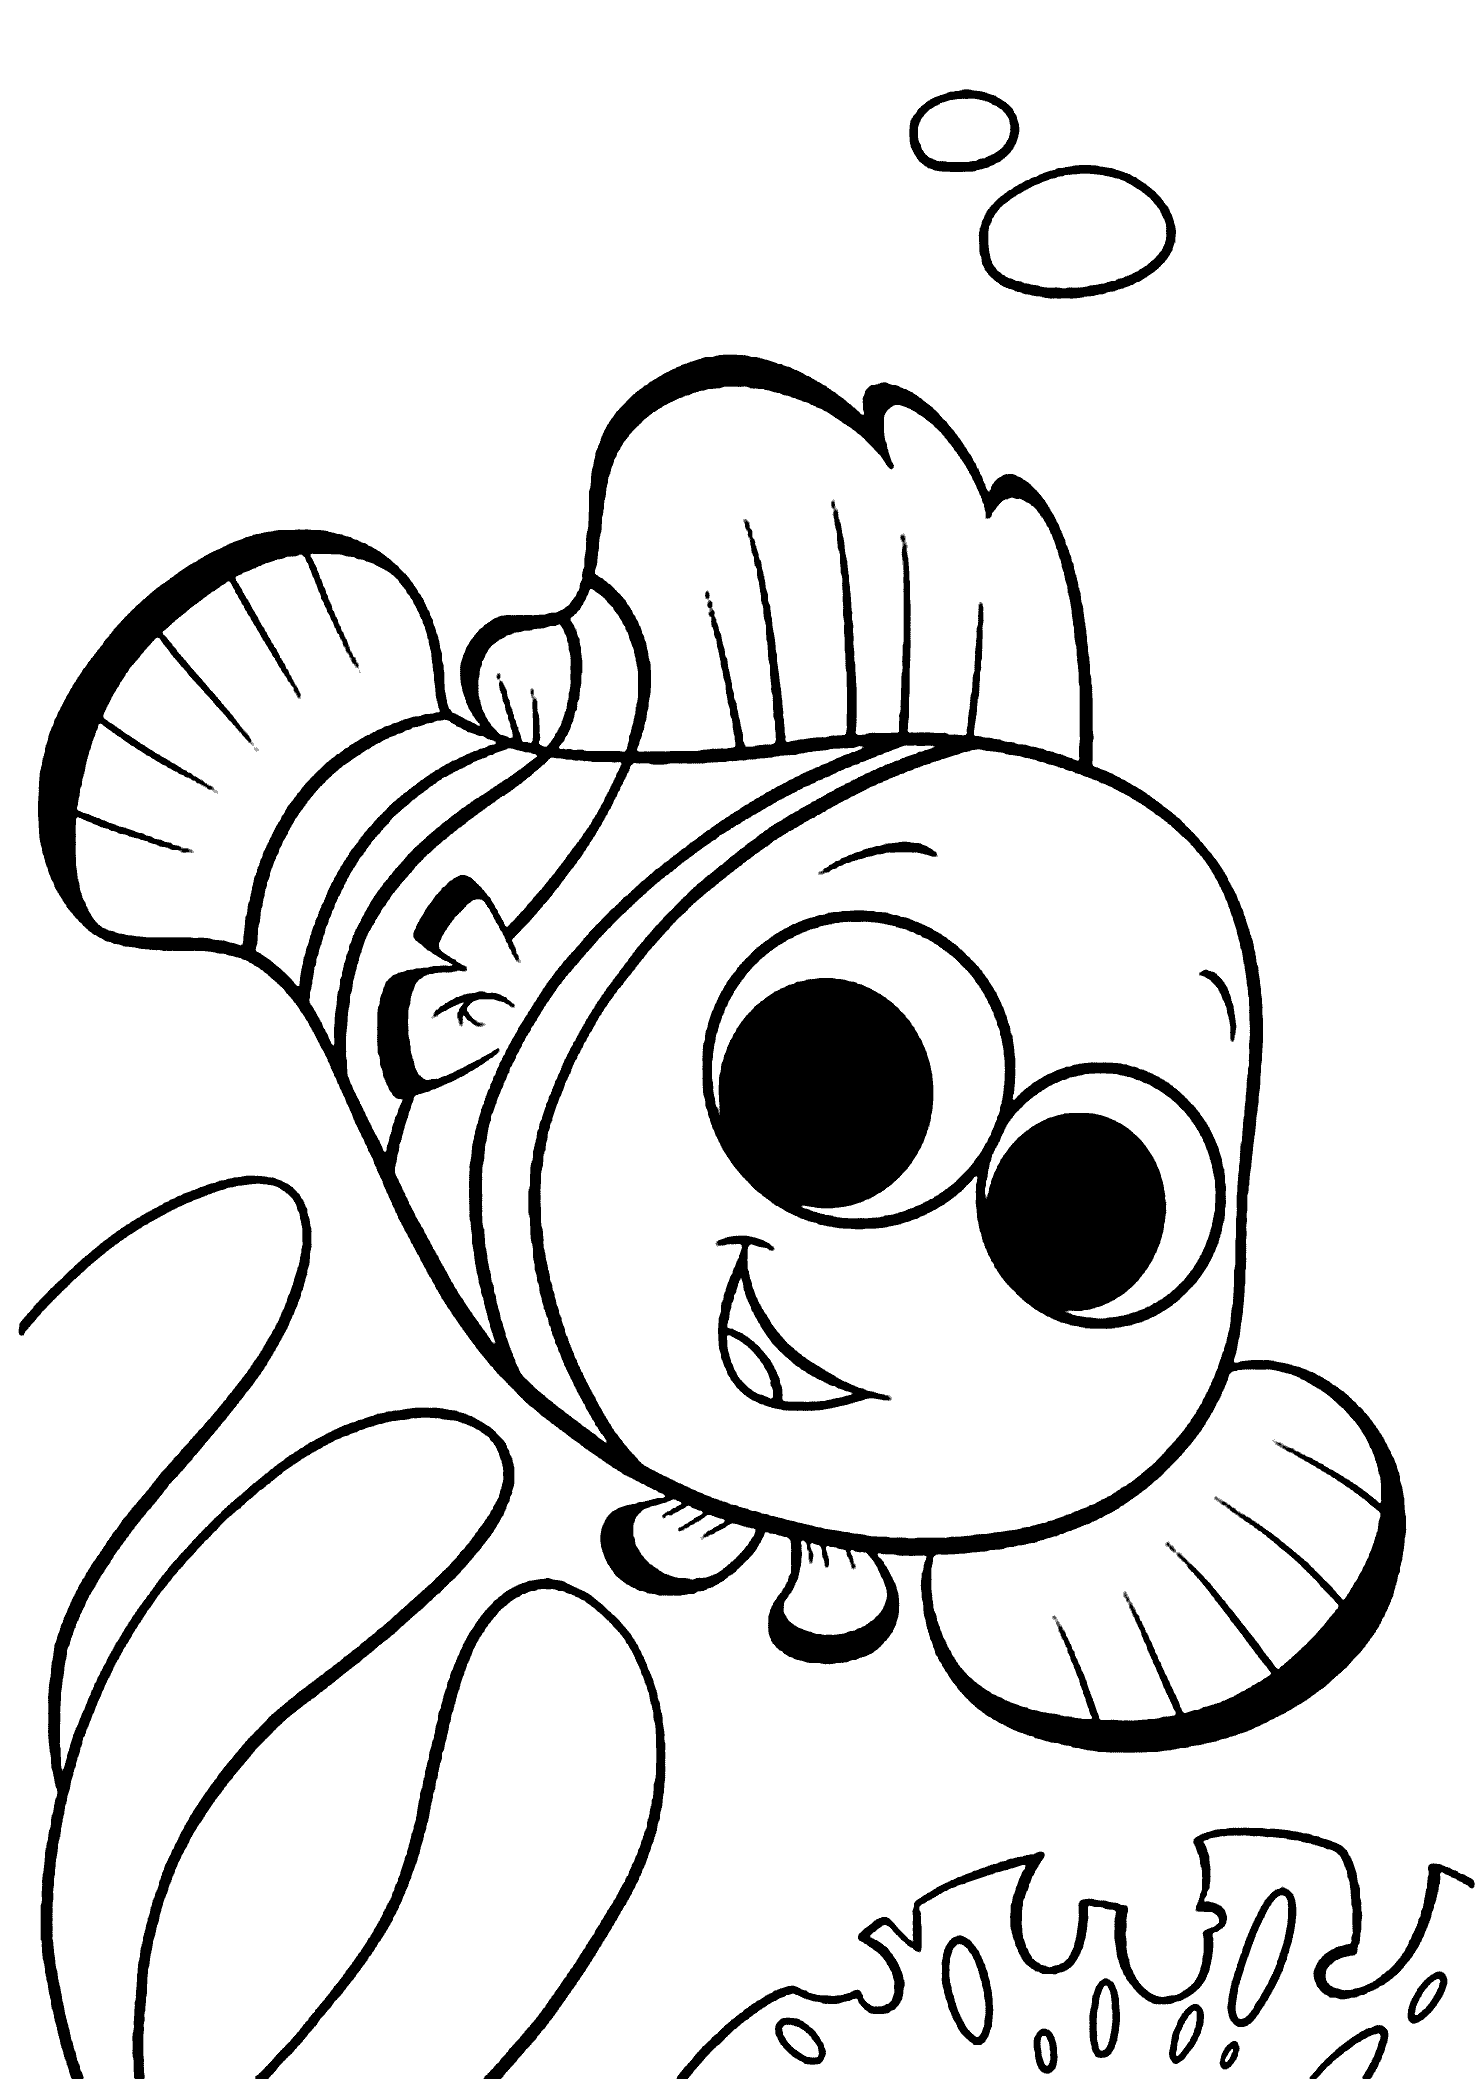 finding nemo coloring page finding nemo coloring pages to download and print for free page coloring finding nemo 